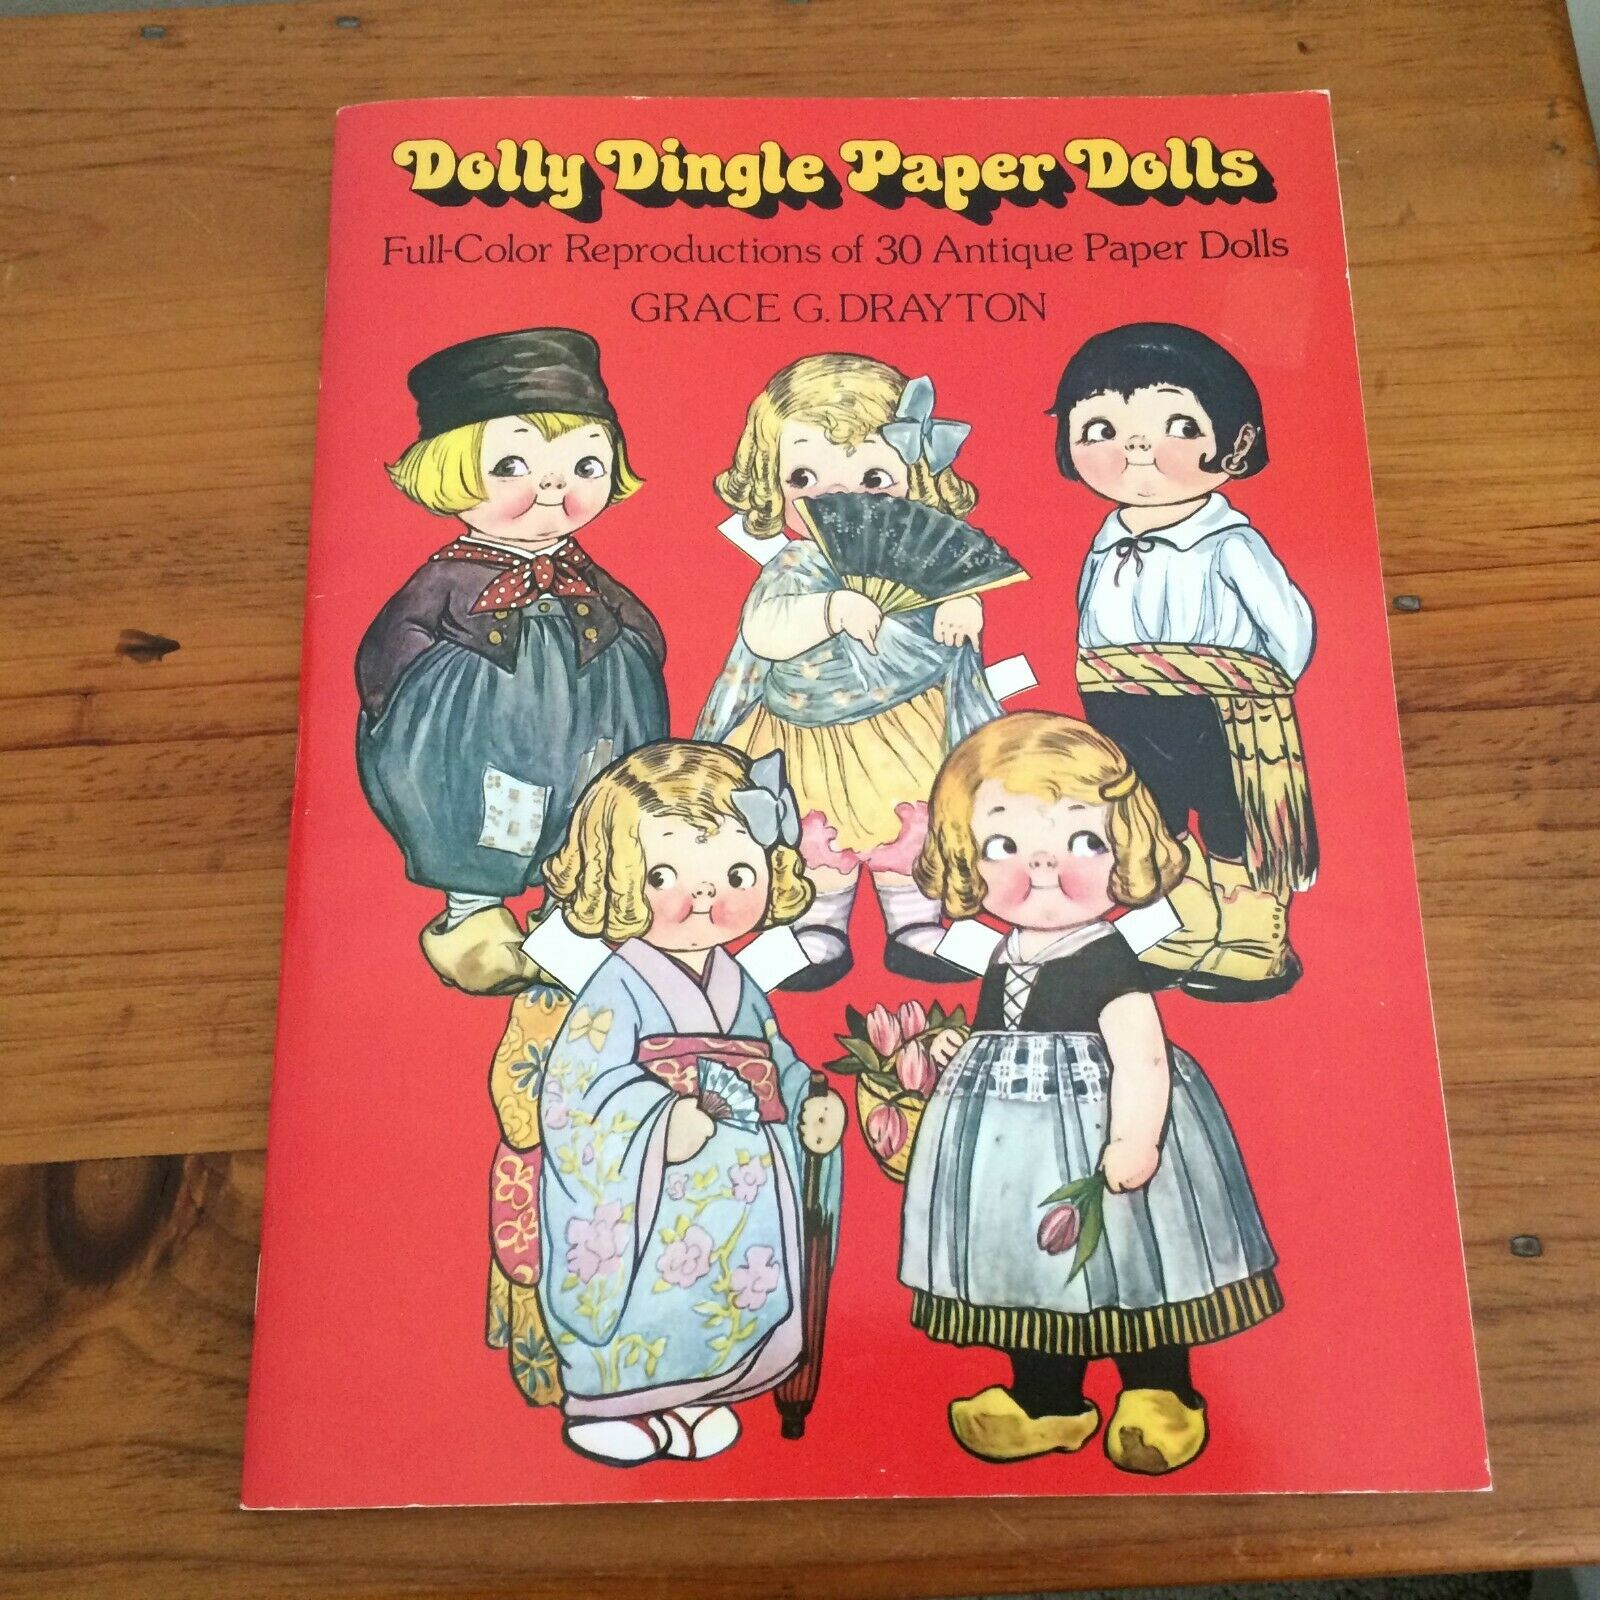 Dolly Dingle Paper Dolls  - Copyright 1978  Reproduction Of Antique Paper Dolls